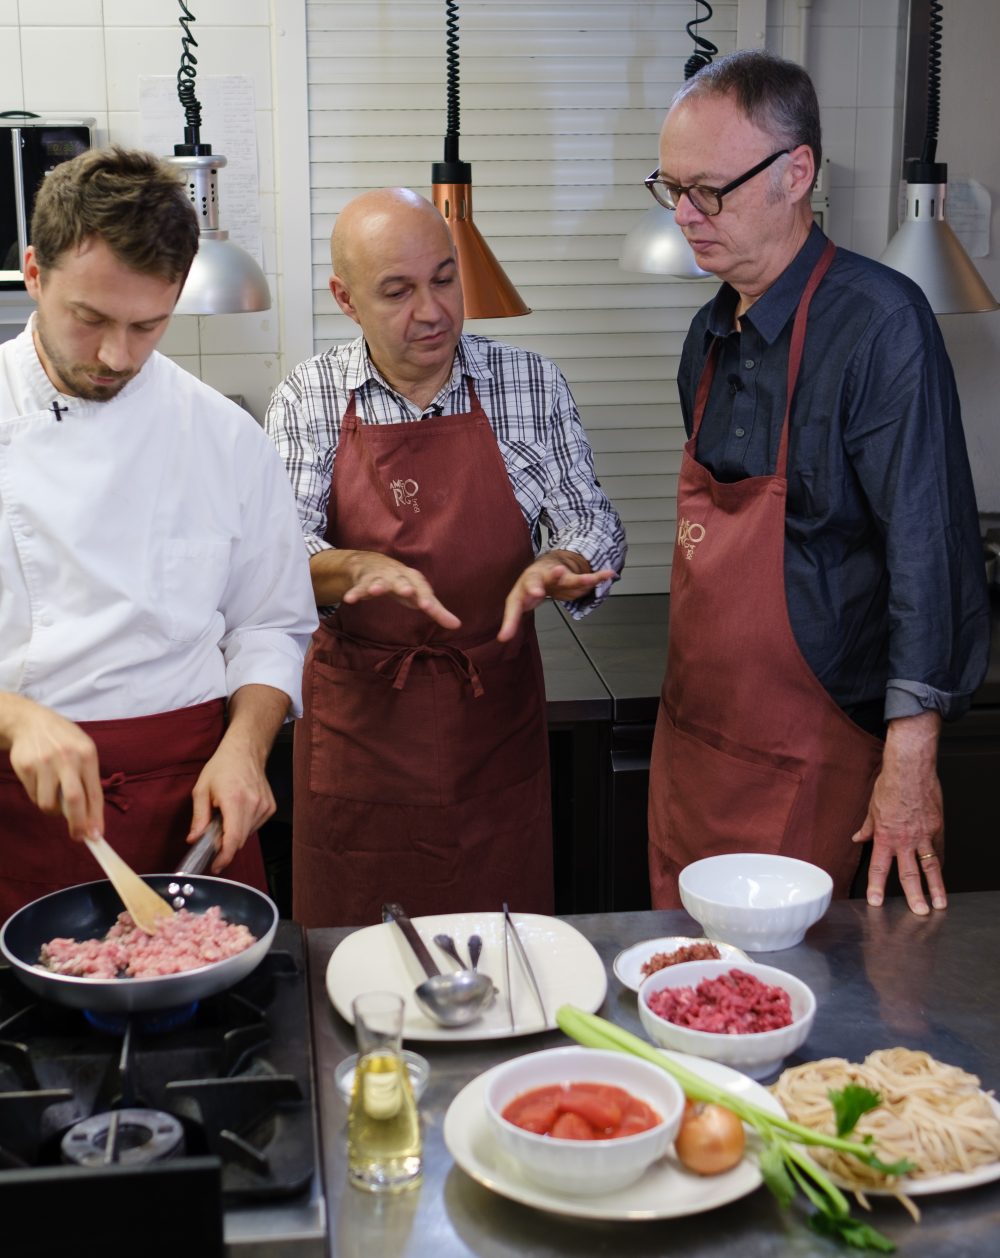 Just down the street at the Michelin-starred Amerigo, ​I finally got a lesson in true ragù Bolognese from chef Alberto Bettini–three different meats cooked for hours with no cream or other dairy.